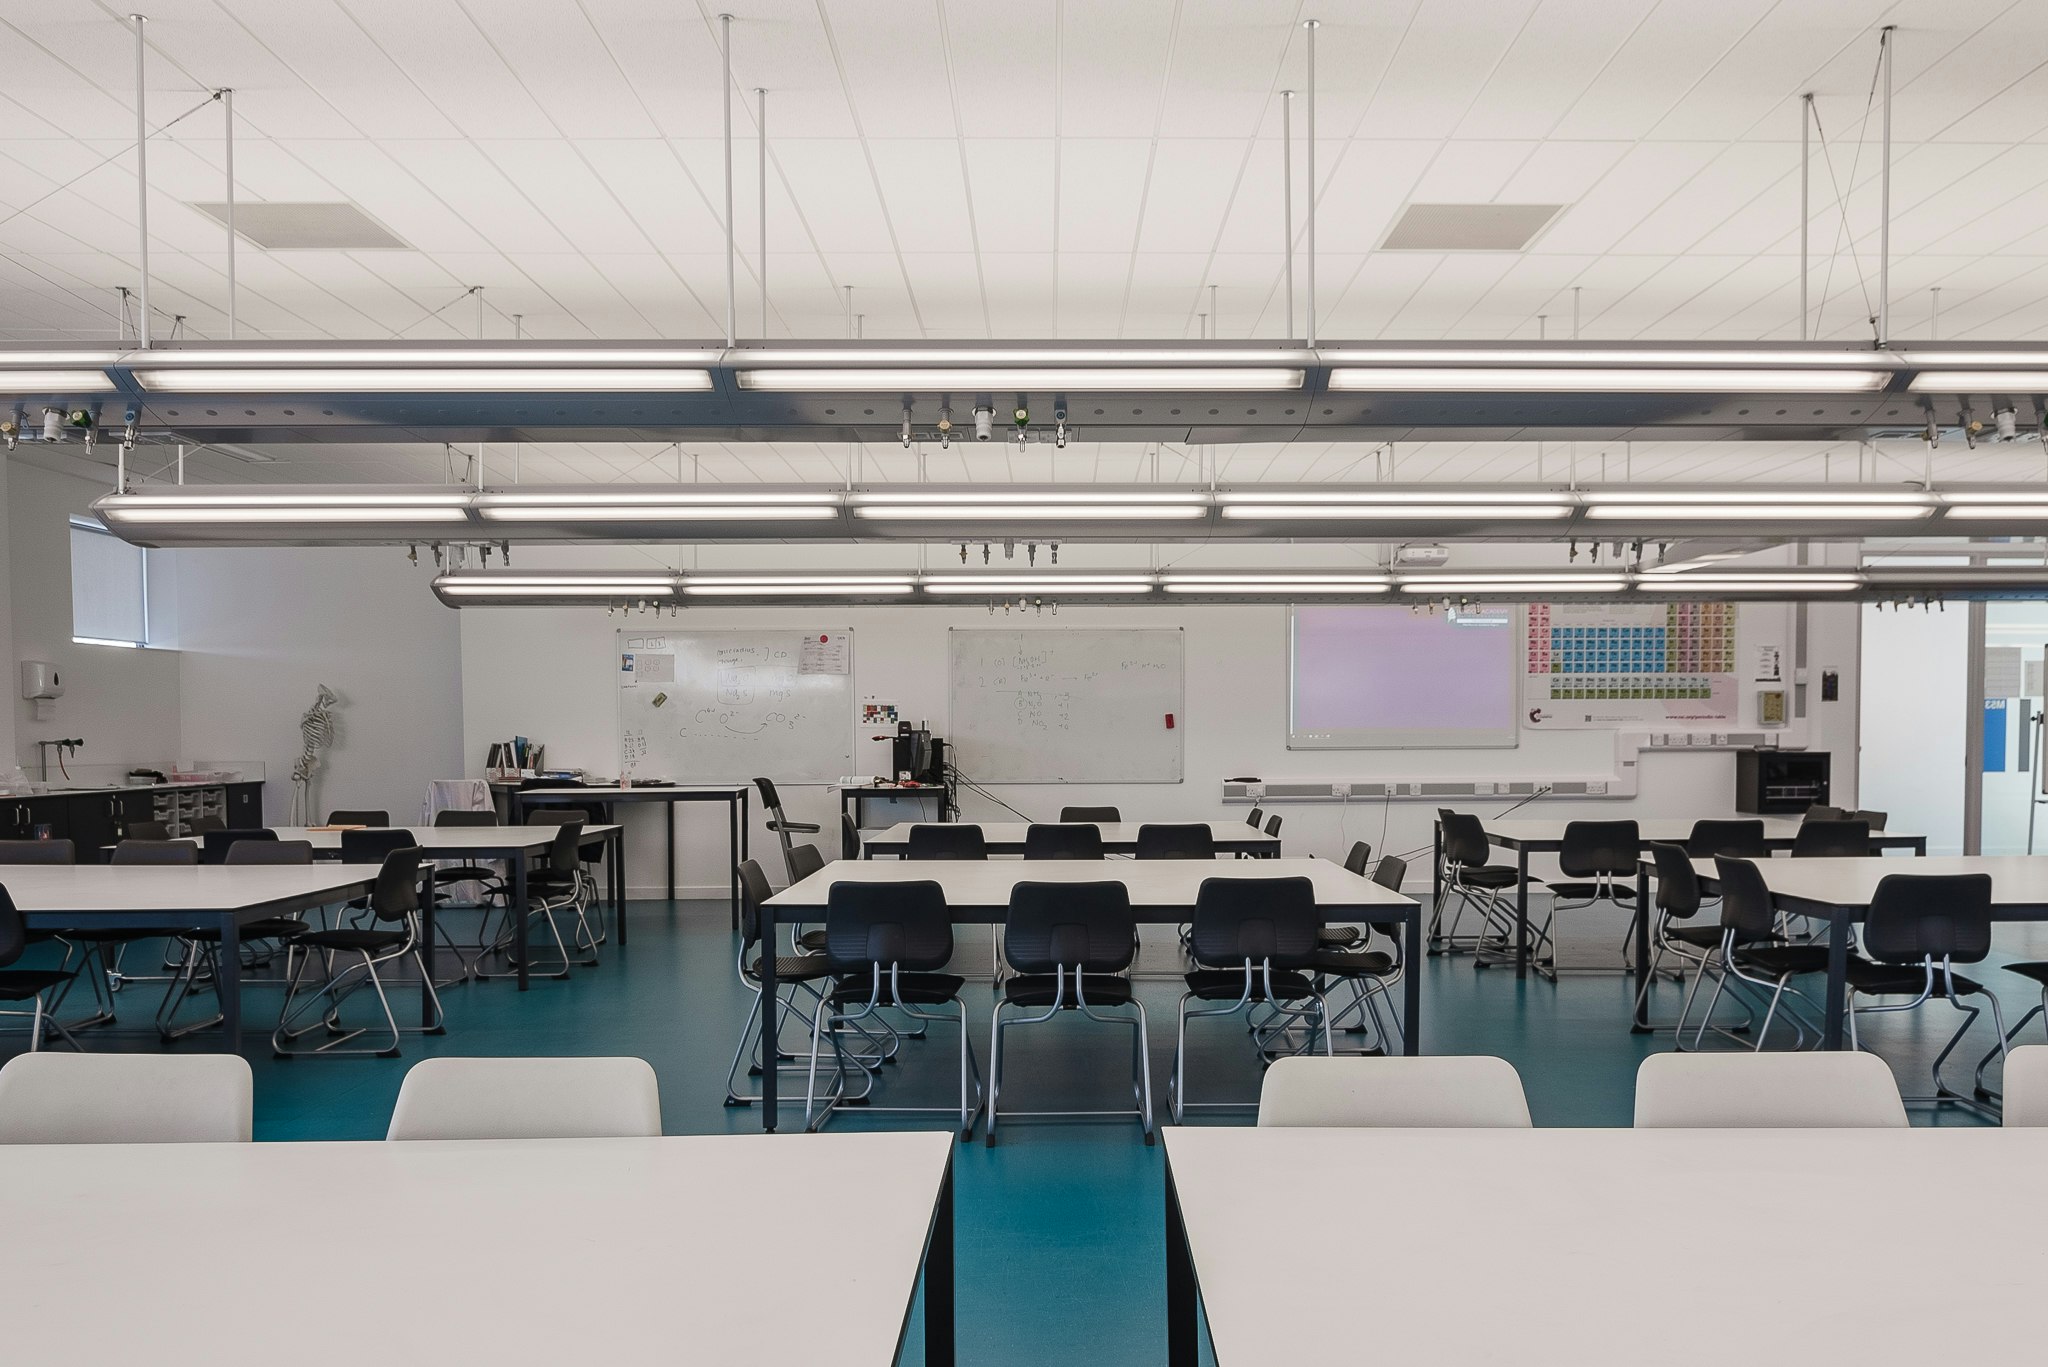 London Academy of Excellence Tottenham - Science classroom / Laboratory image 8